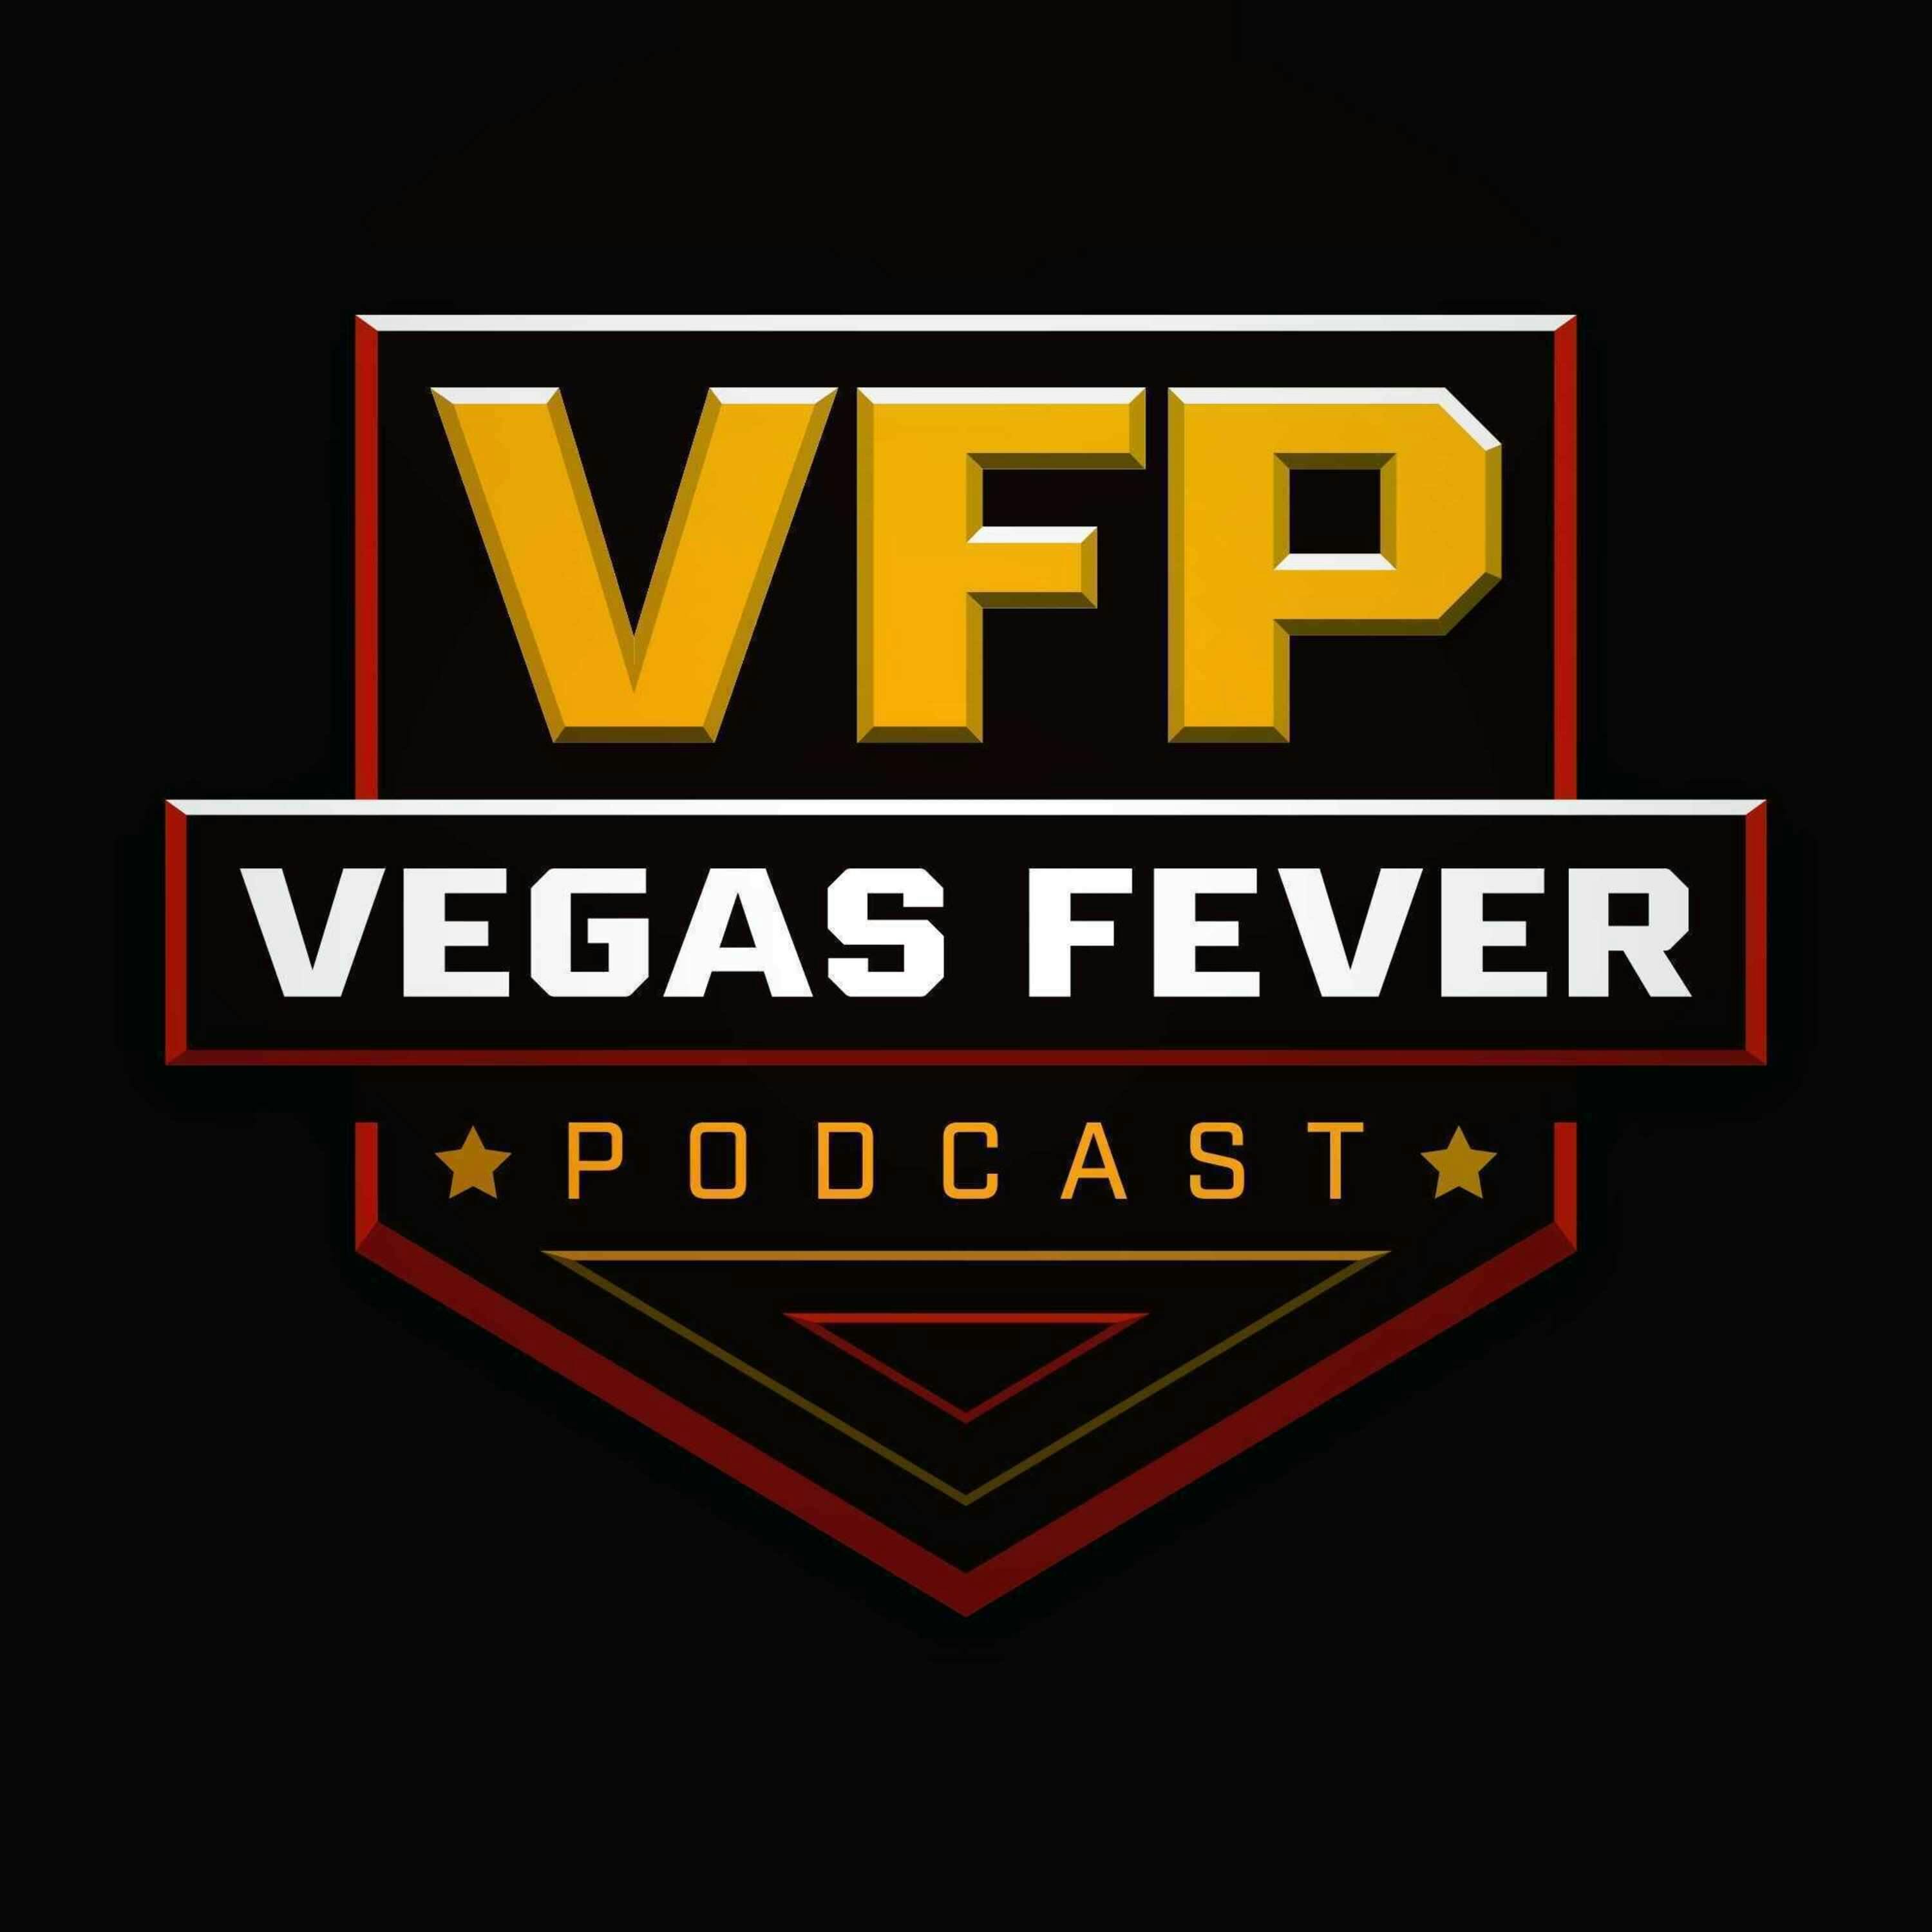 UNLV & VGK schedule talk as we inch closer to the start of the season for both. A's talk aswell.